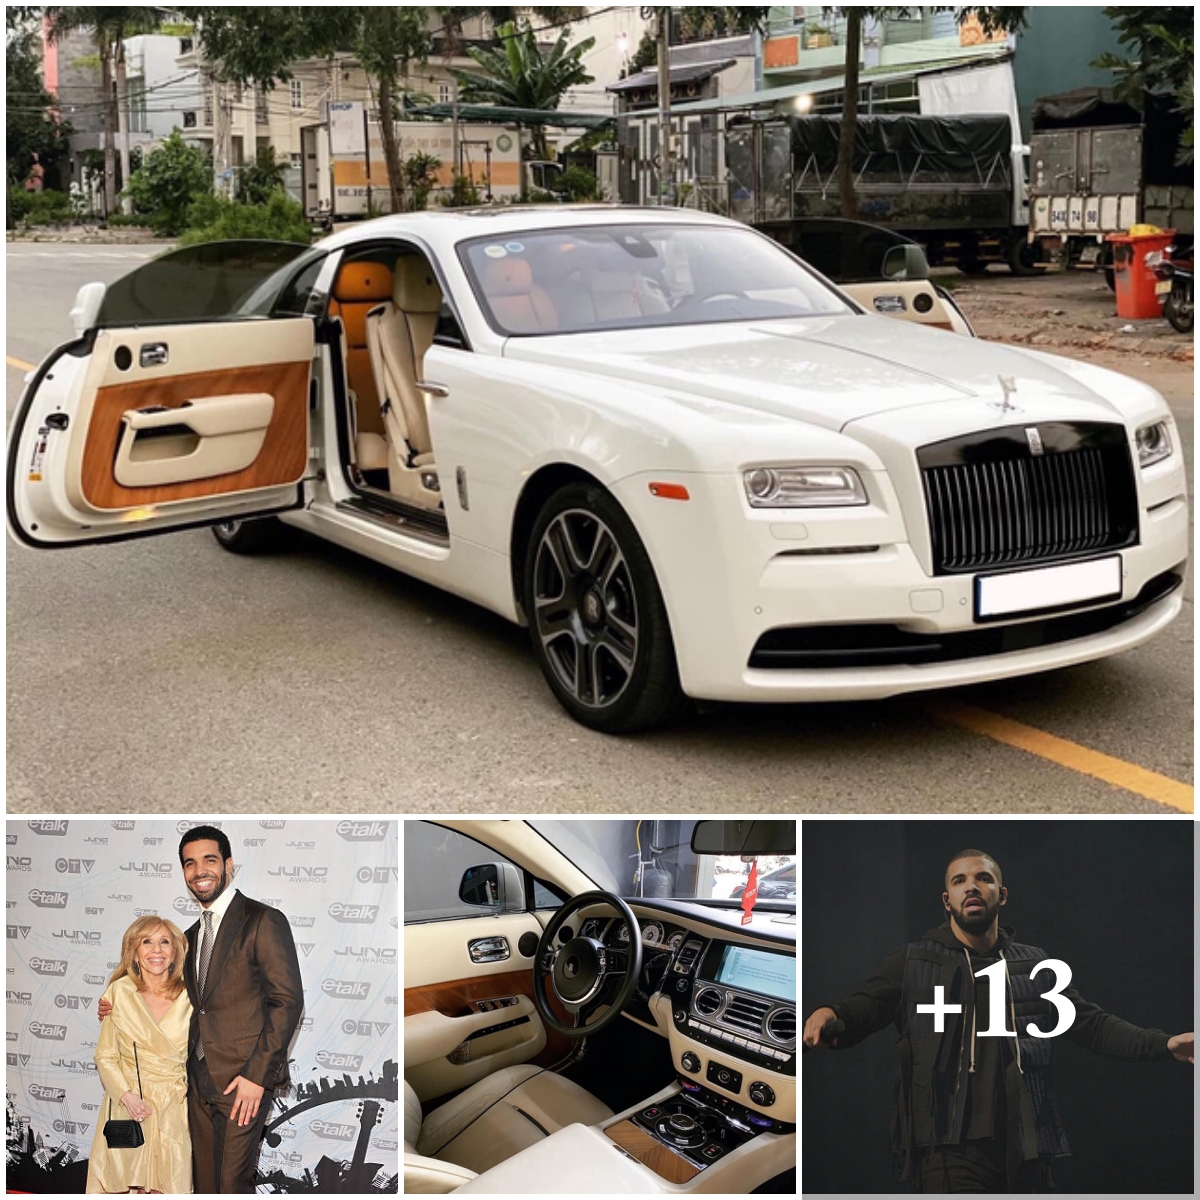 Drake left everyone in awe when his mother gifted him a Rolls-Royce Wraith for his 37th birthday celebration.